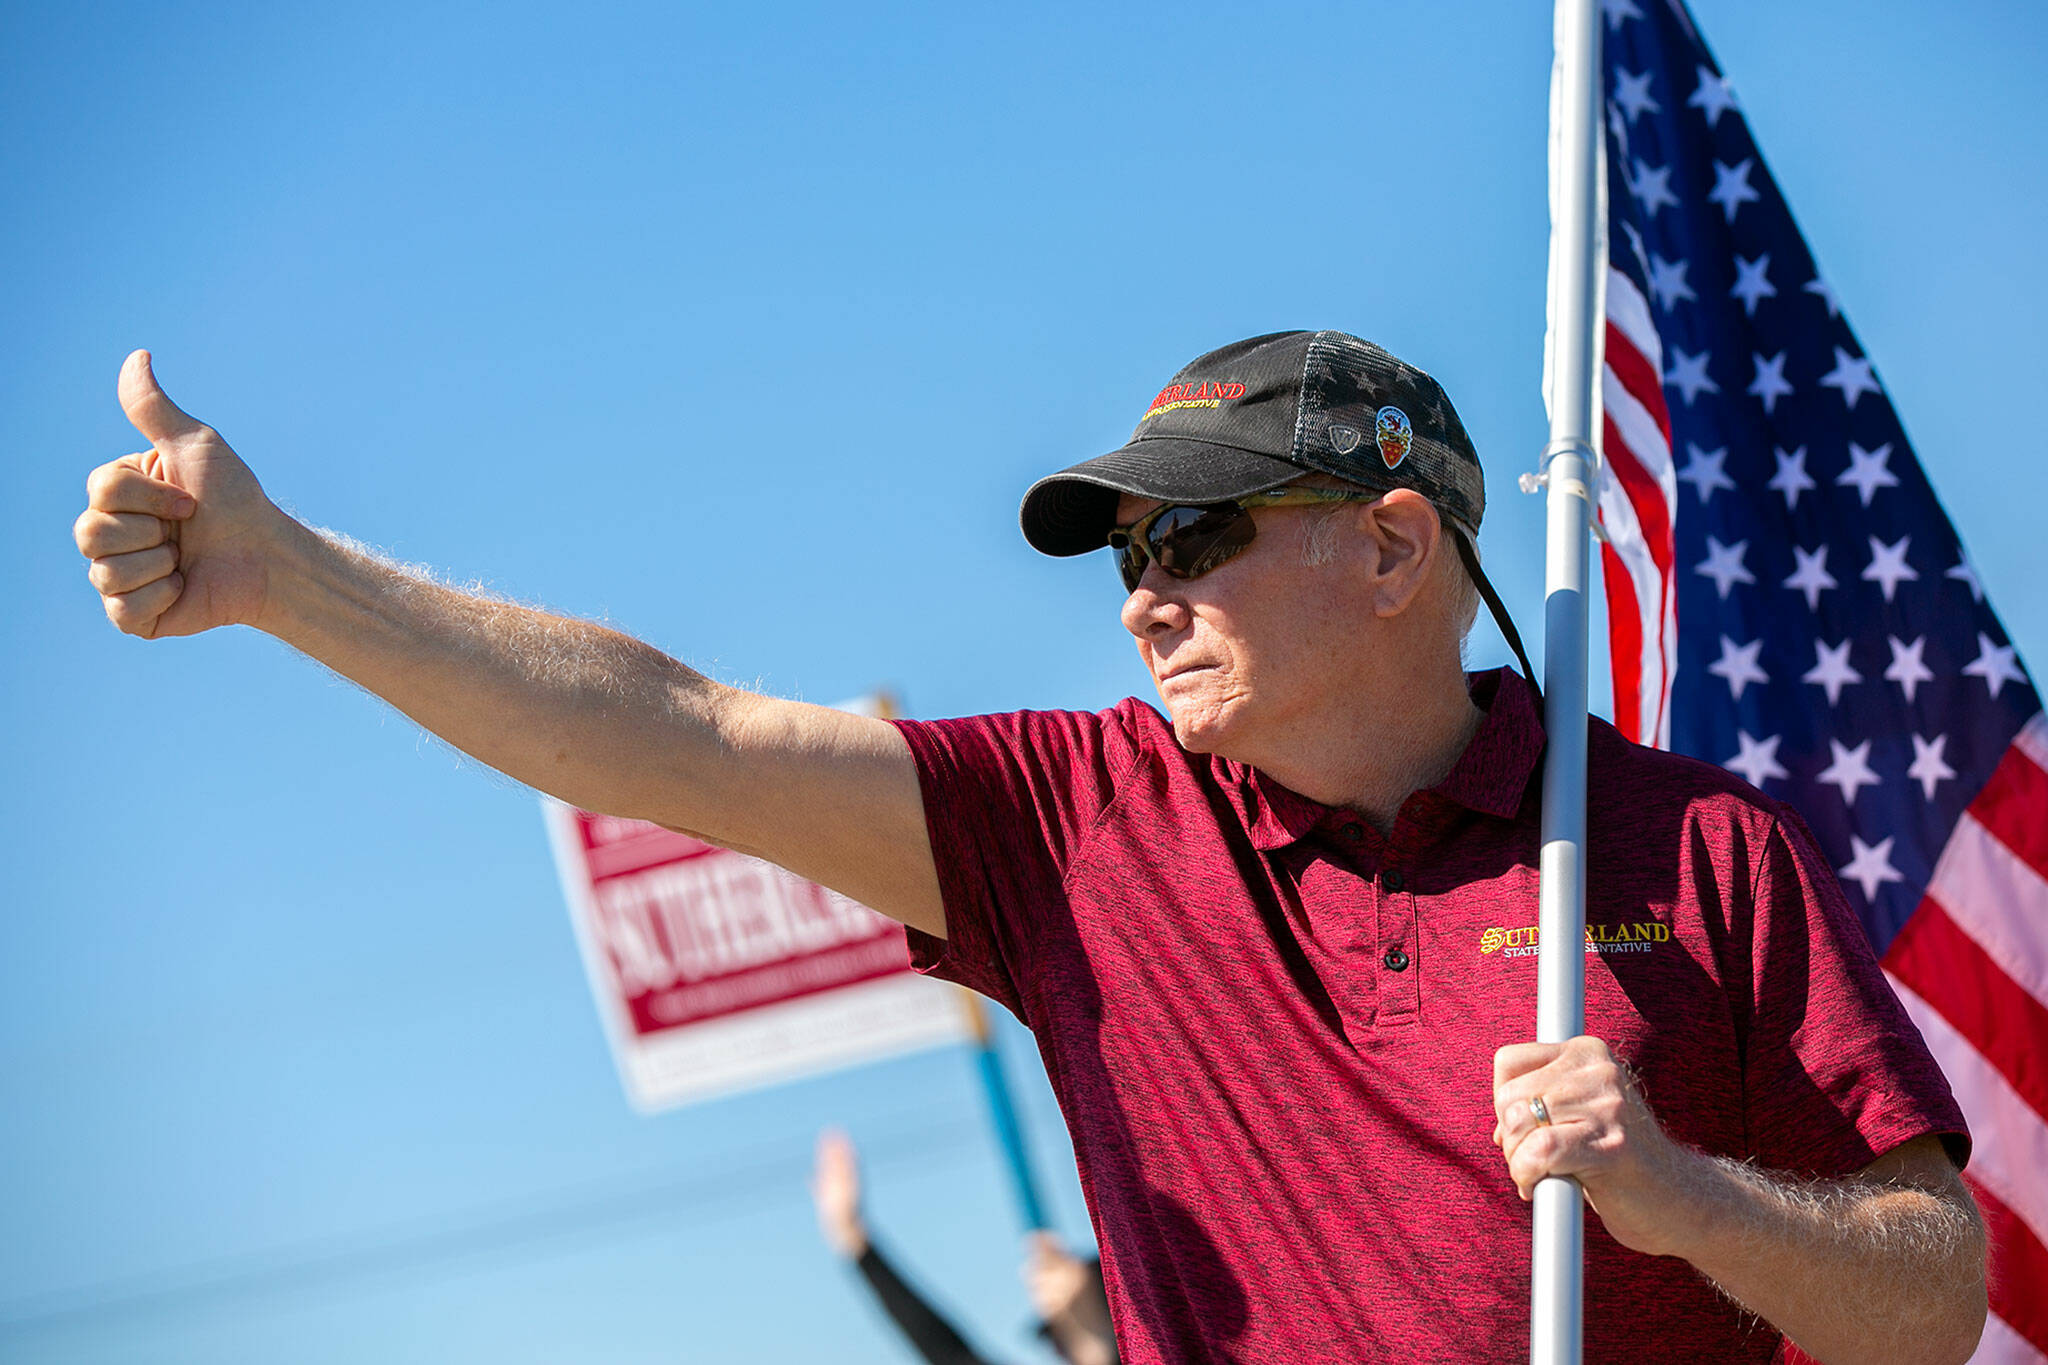 State Representative Robert Sutherland gives a thumbs-up to passing drivers as he and a few volunteers wave flags and campaign signs along the side of State Route 9 on July 22, in Lake Stevens. (Ryan Berry / The Herald)